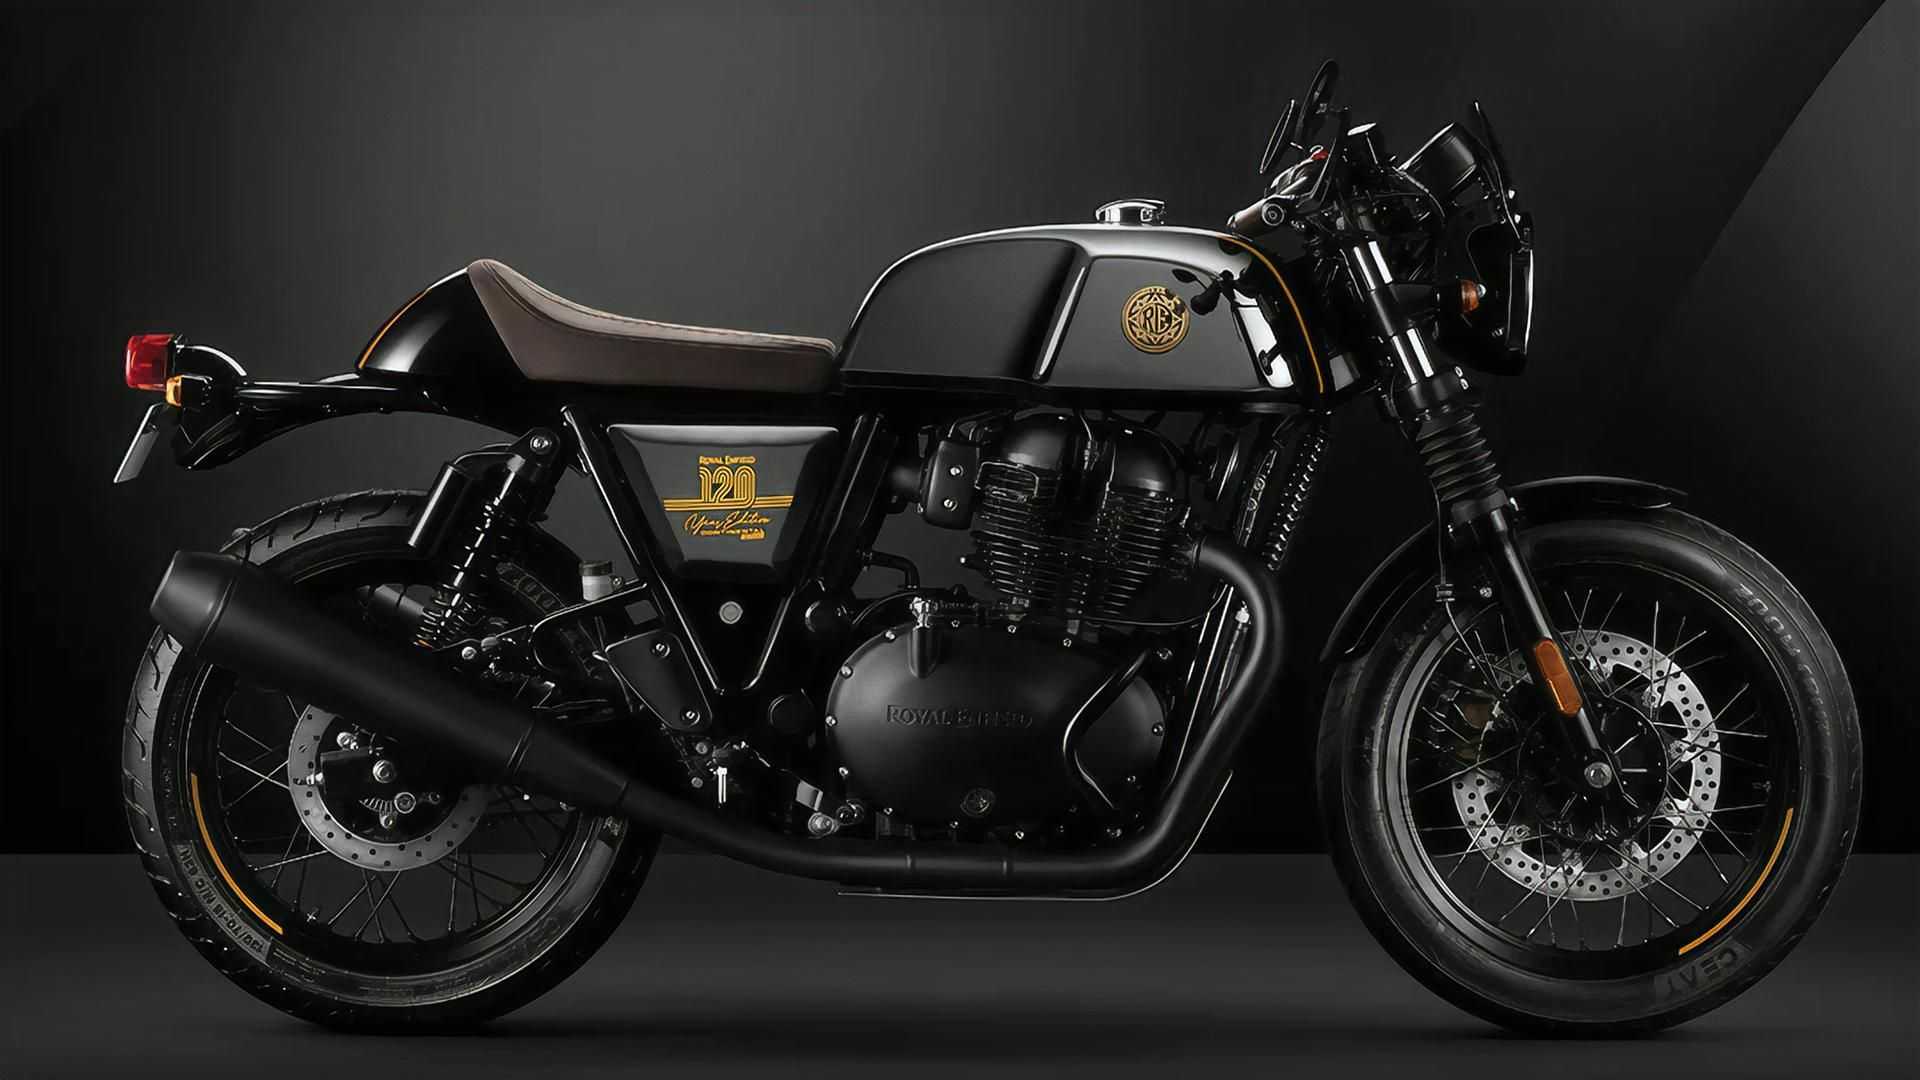 Royal Enfield To Bring 120th Anniversary Limited Edition Bikes To Europe